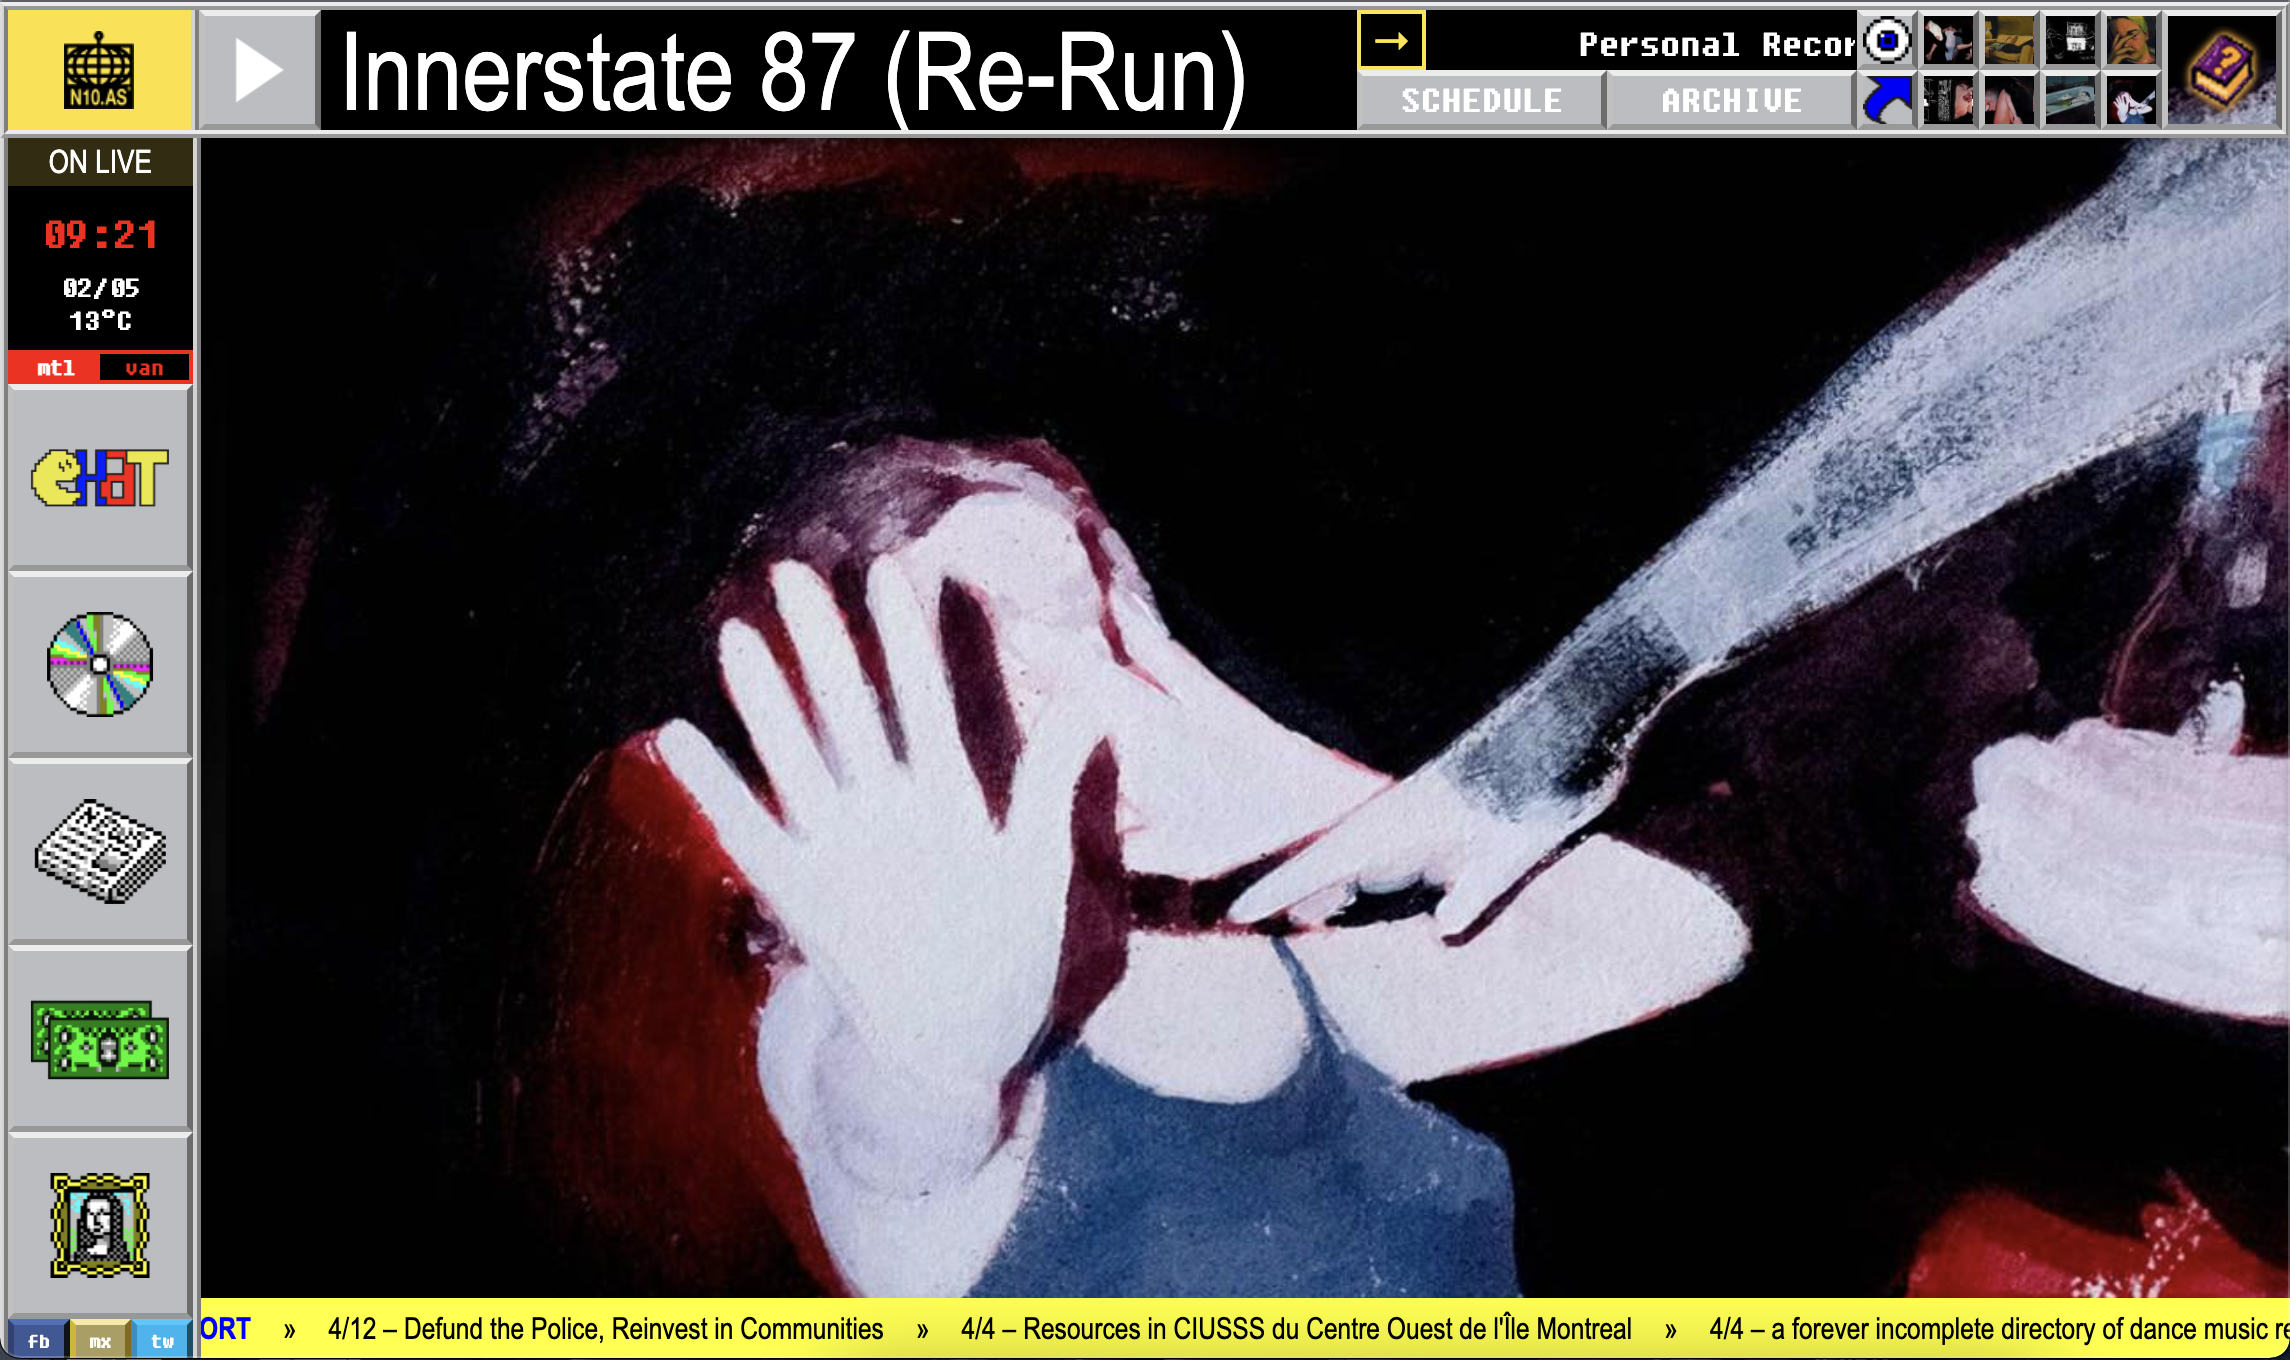 A painting of a woman with her hand stretched out in front of her face created by artist Alissa Zilber displayed on n10as, a community-based radio station broadcasting from Montréal.